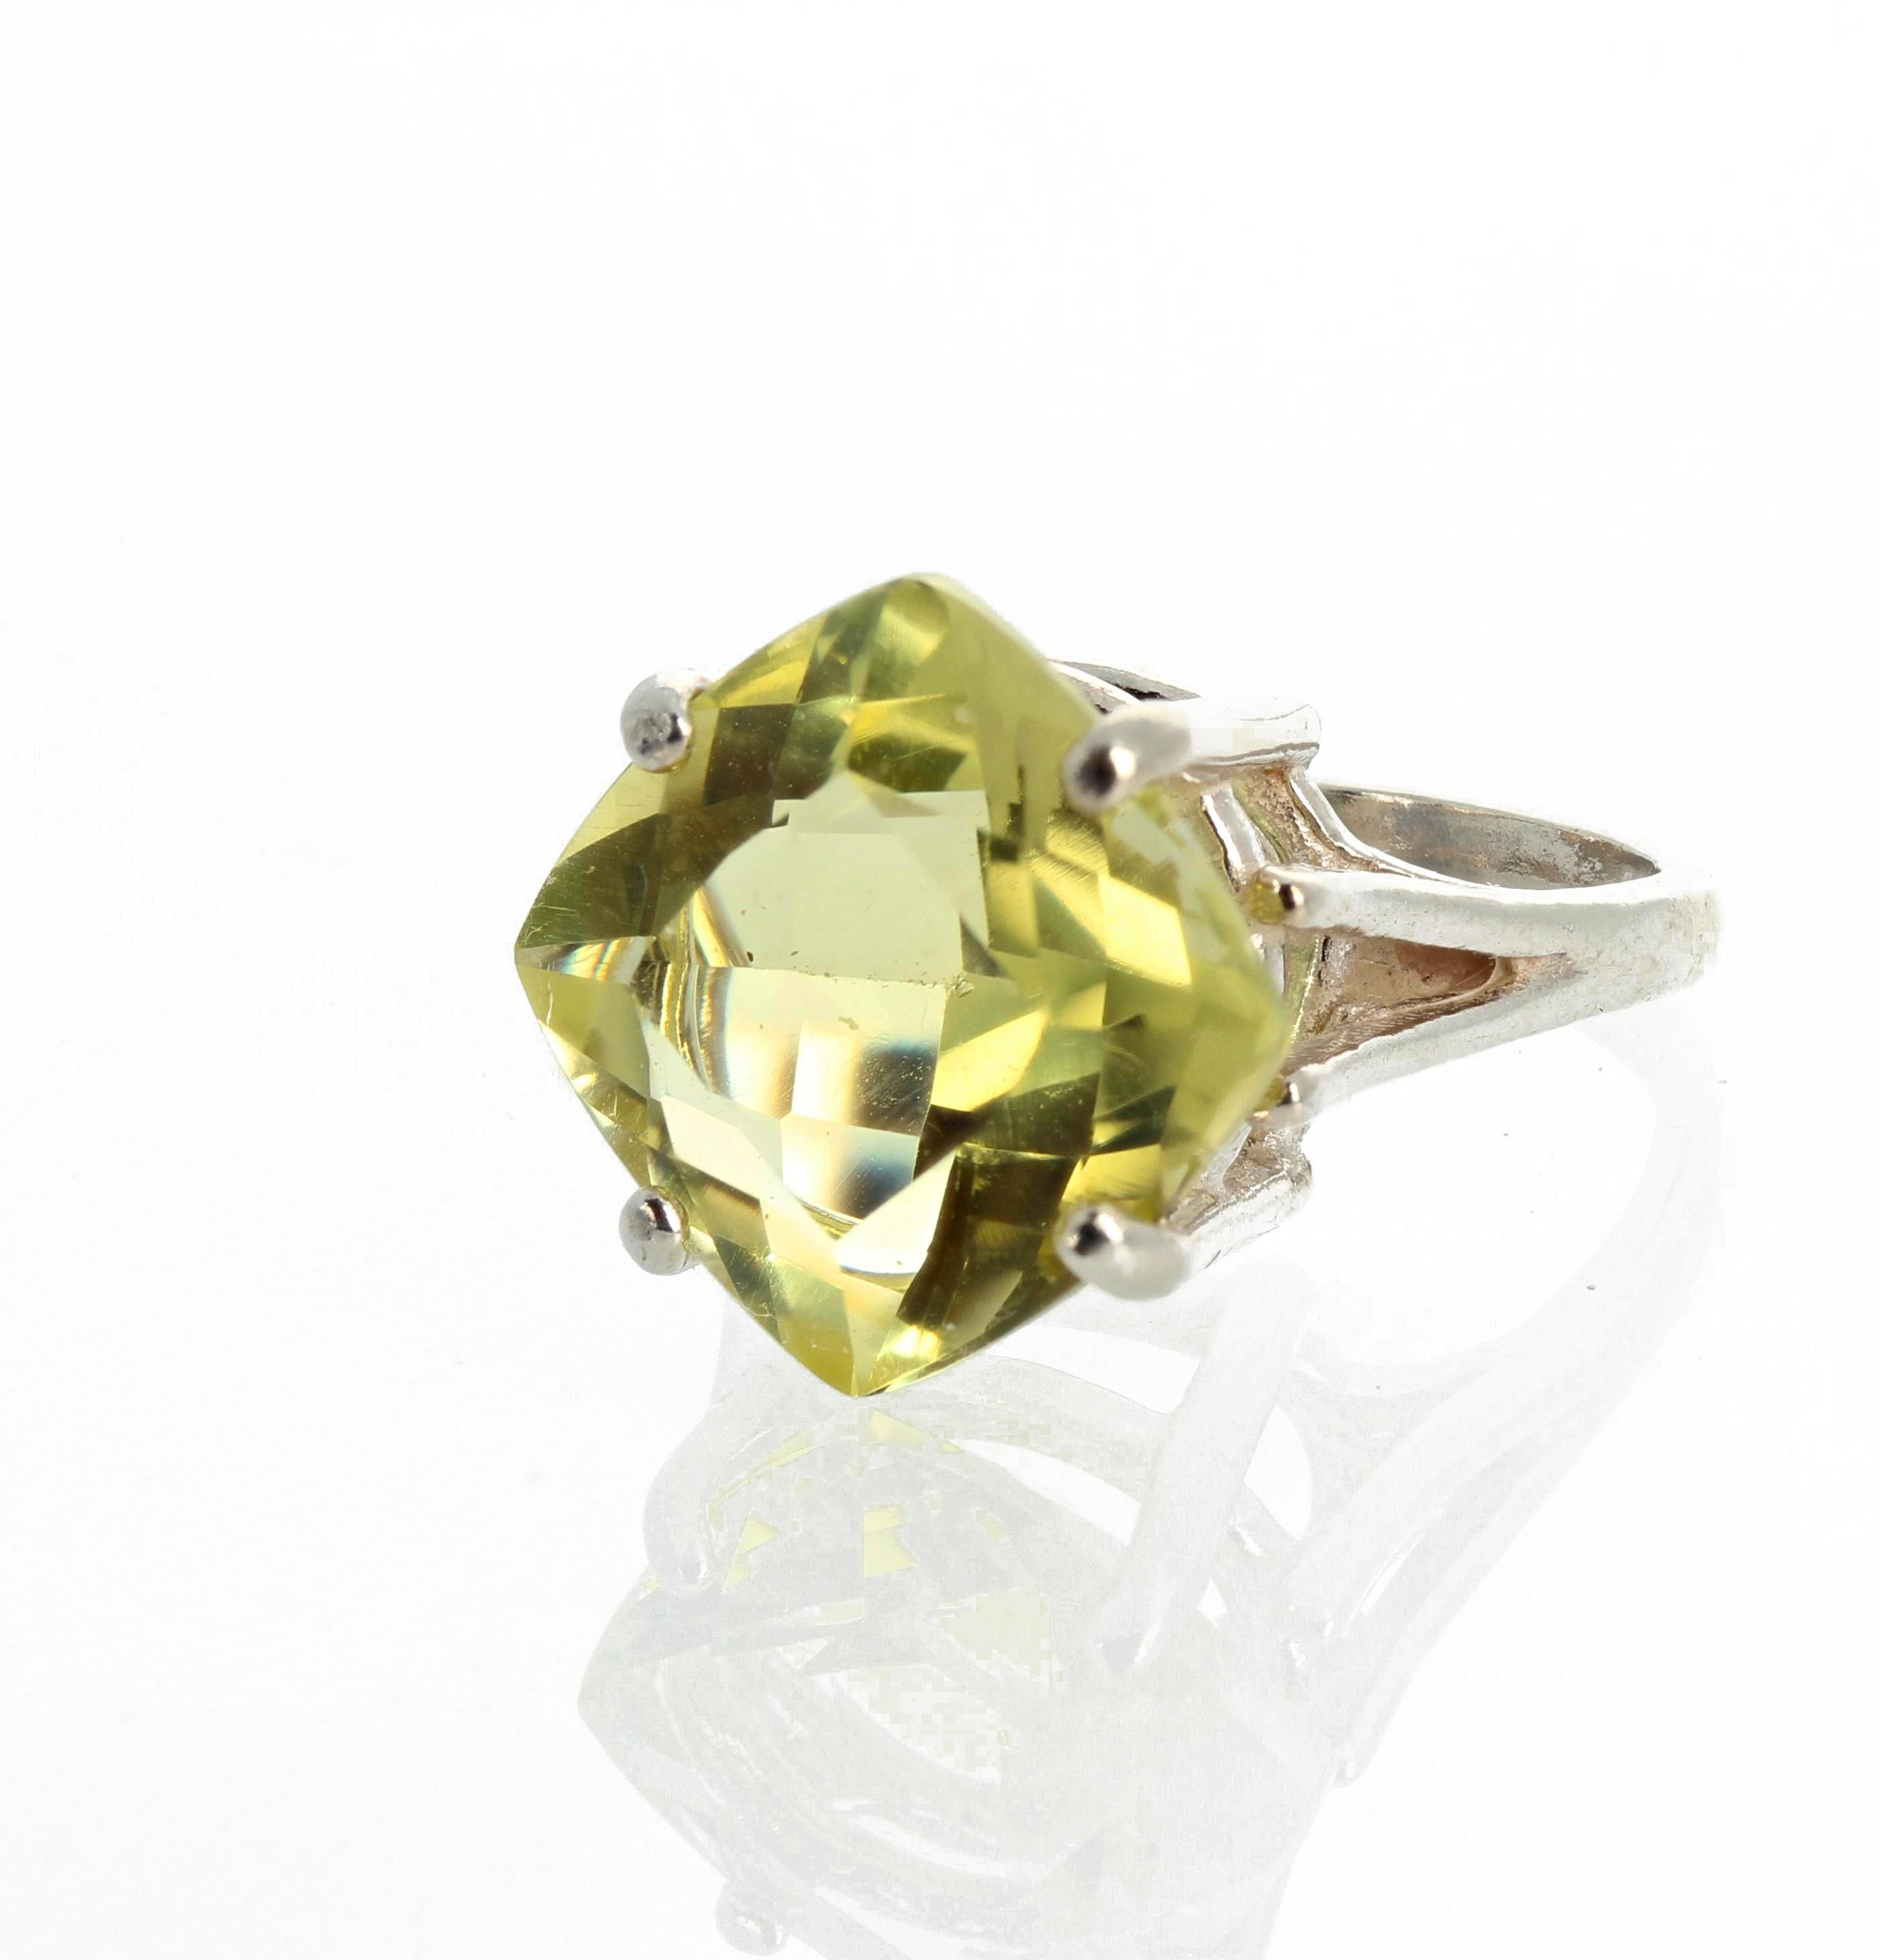 Brilliant square emerald cut sparkling 7.3 carat Lemon Quartz (13 mm x 13 mm) set in a sterling silver ring size 7 (sizable FOR FREE).  